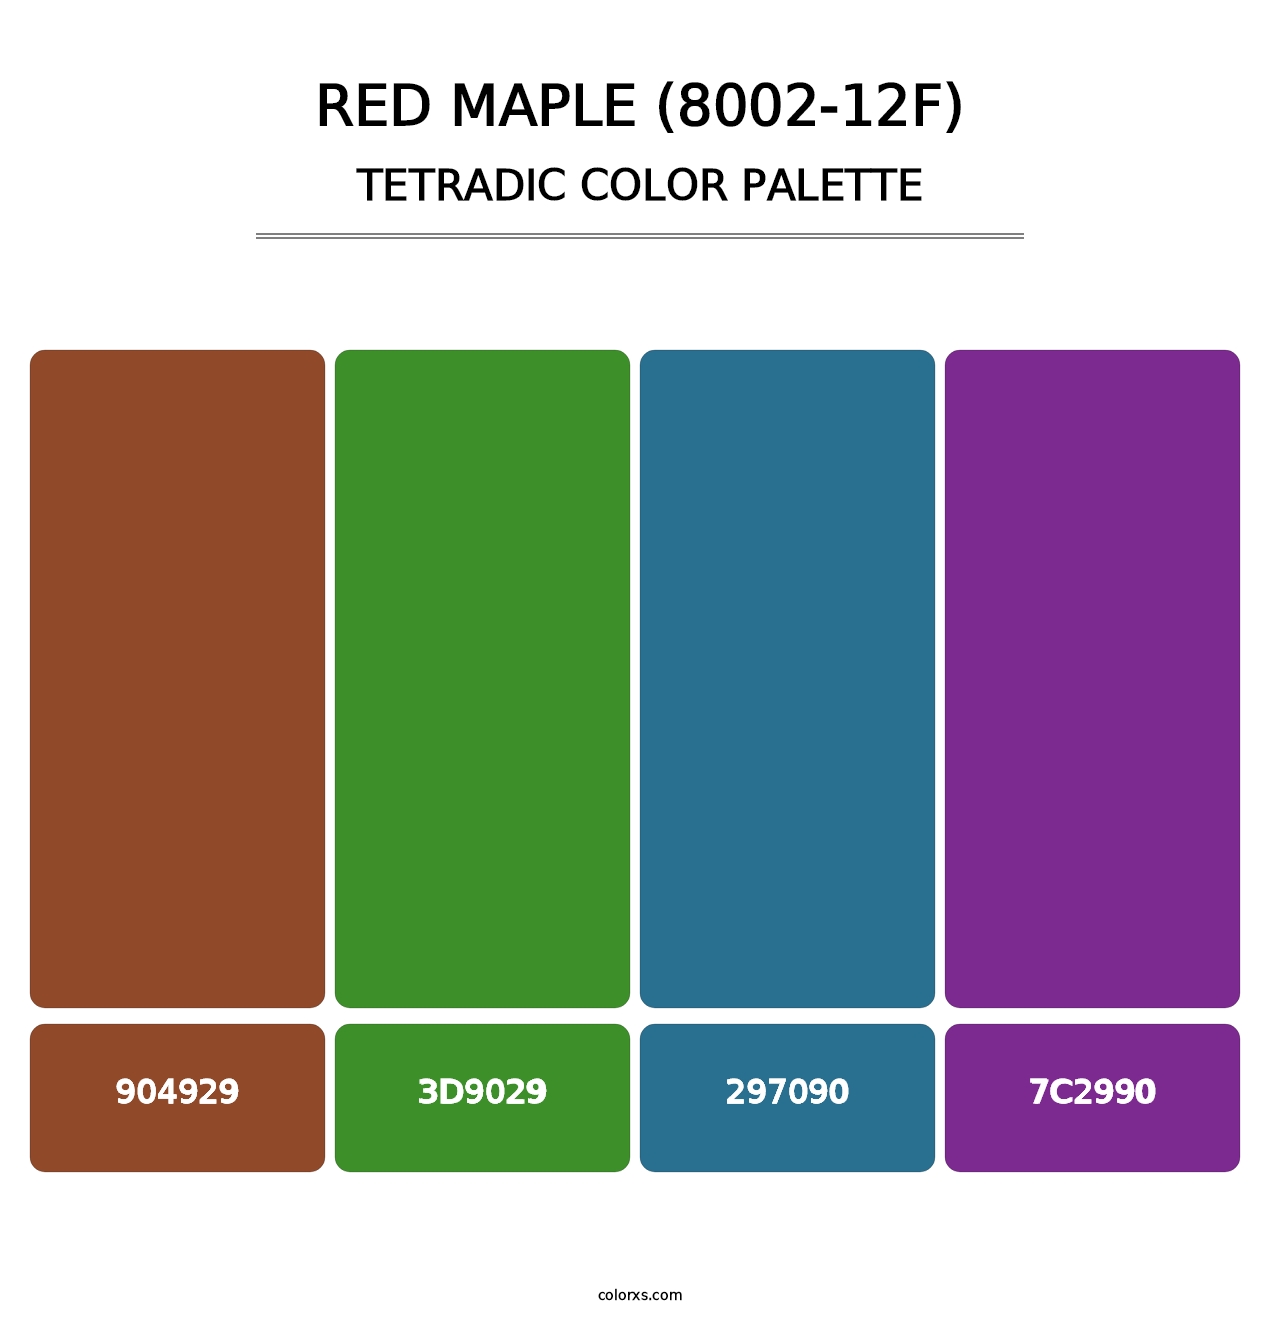 Red Maple (8002-12F) - Tetradic Color Palette